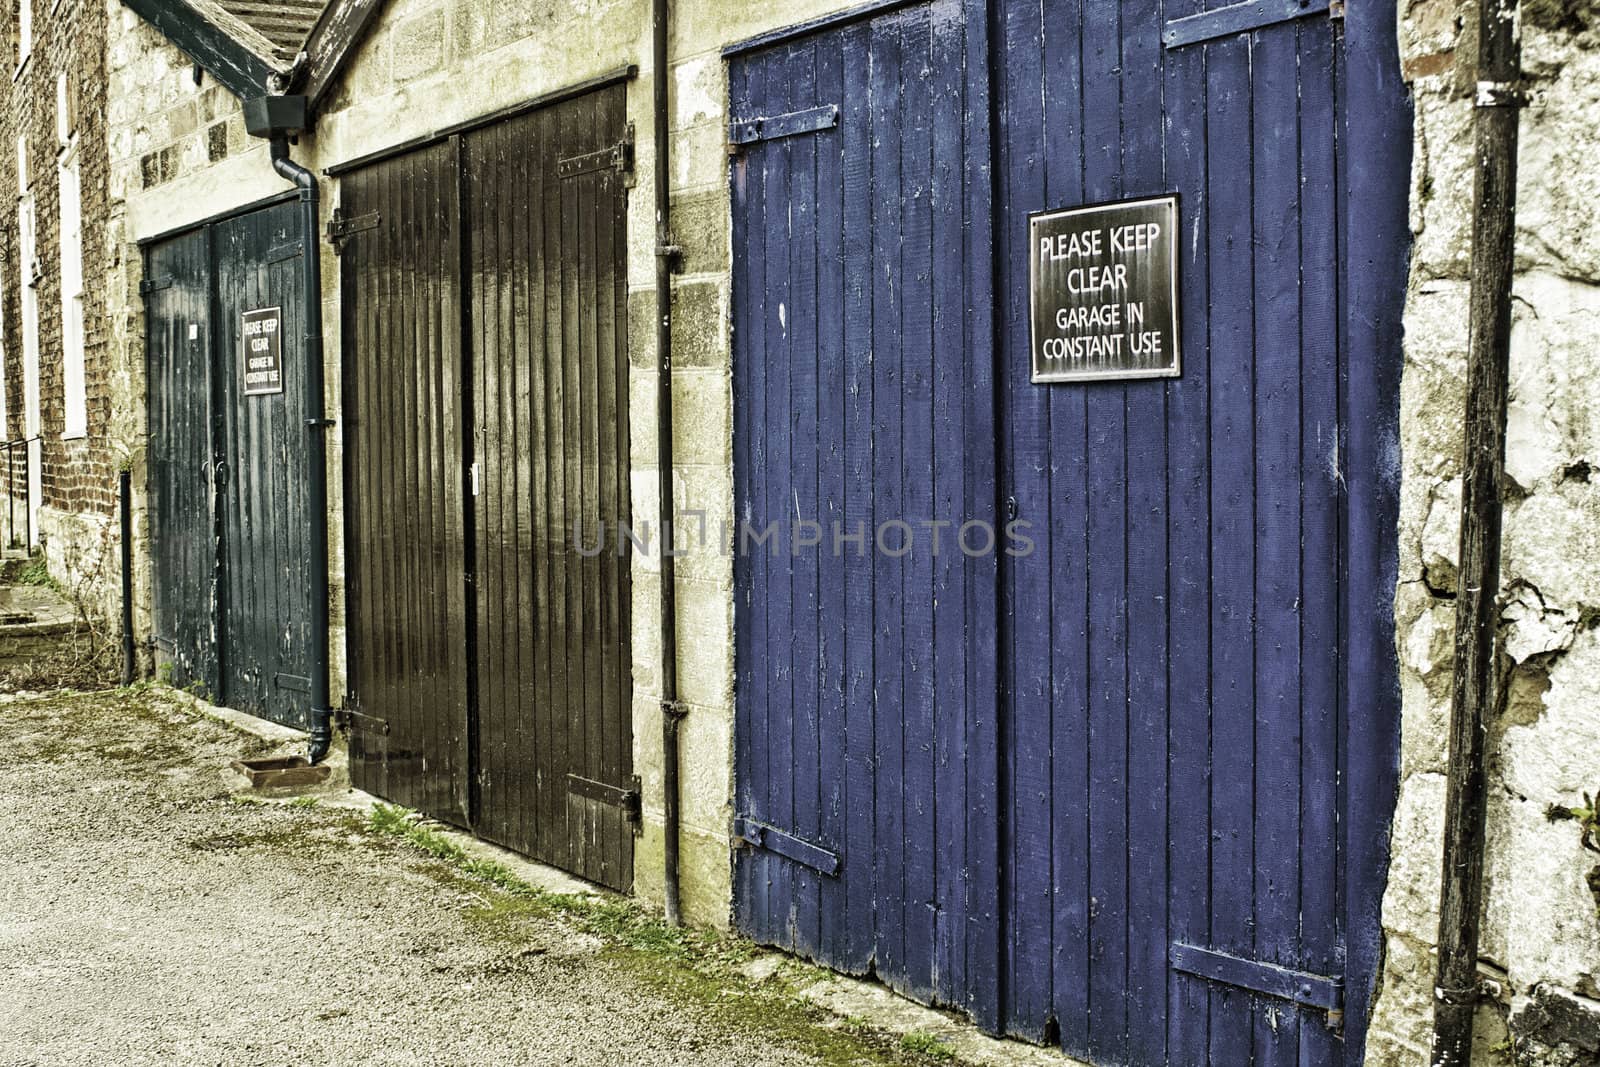 Row of grungy painted garage doors in an urban environmnet with a Please keep clear sign on one